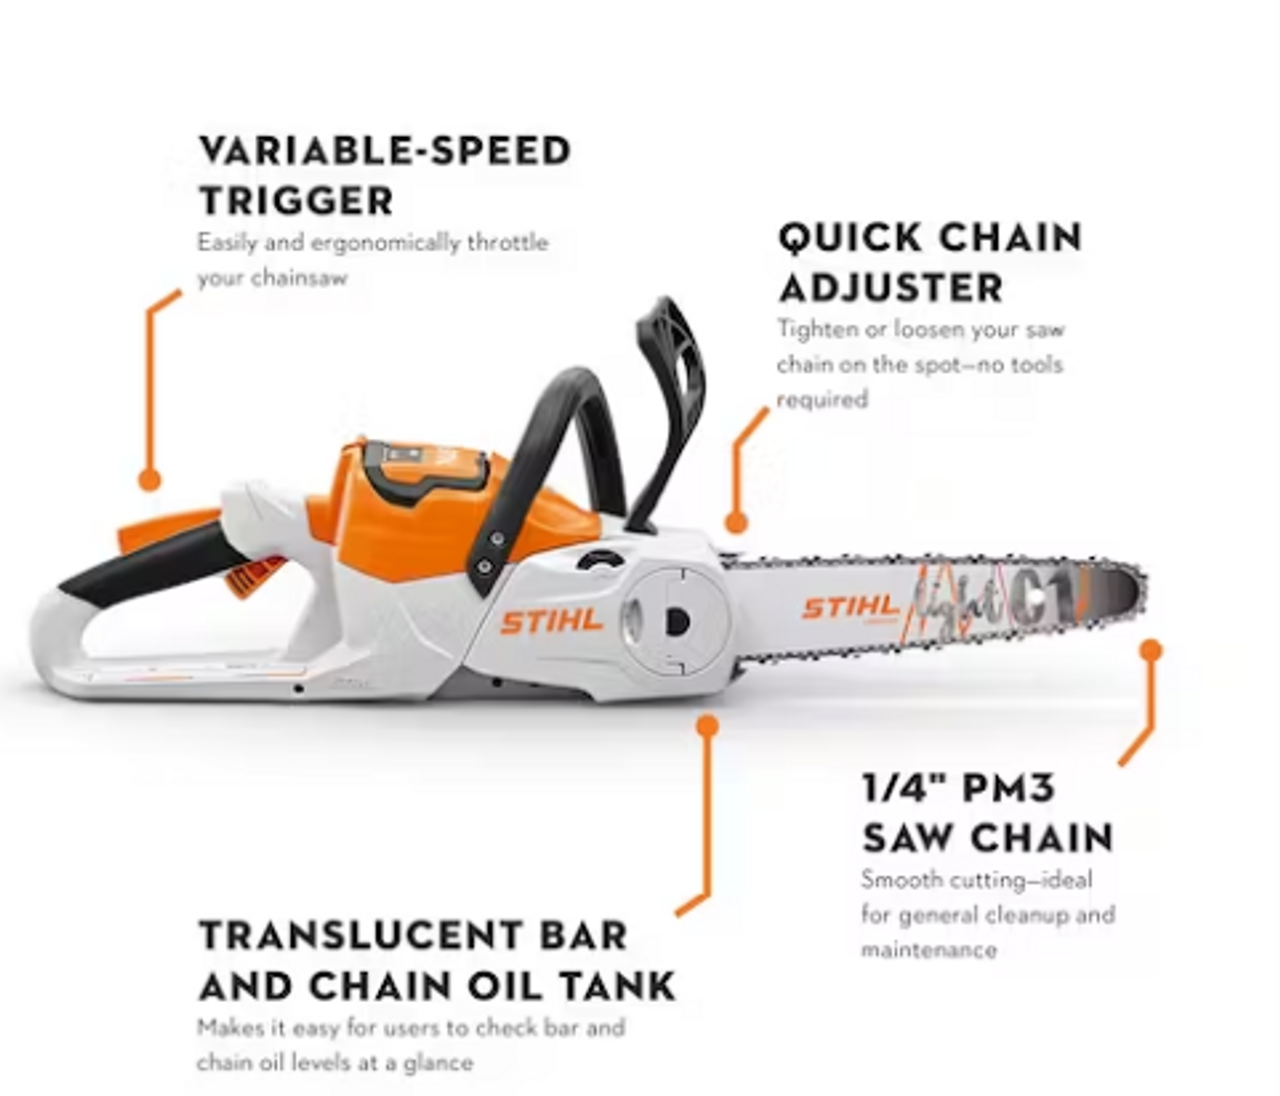 STIHL MSA 60 C-B SET - L-I CHAINSAW W/ 12" BAR & W/O AK 20 BATRY & CHARGER